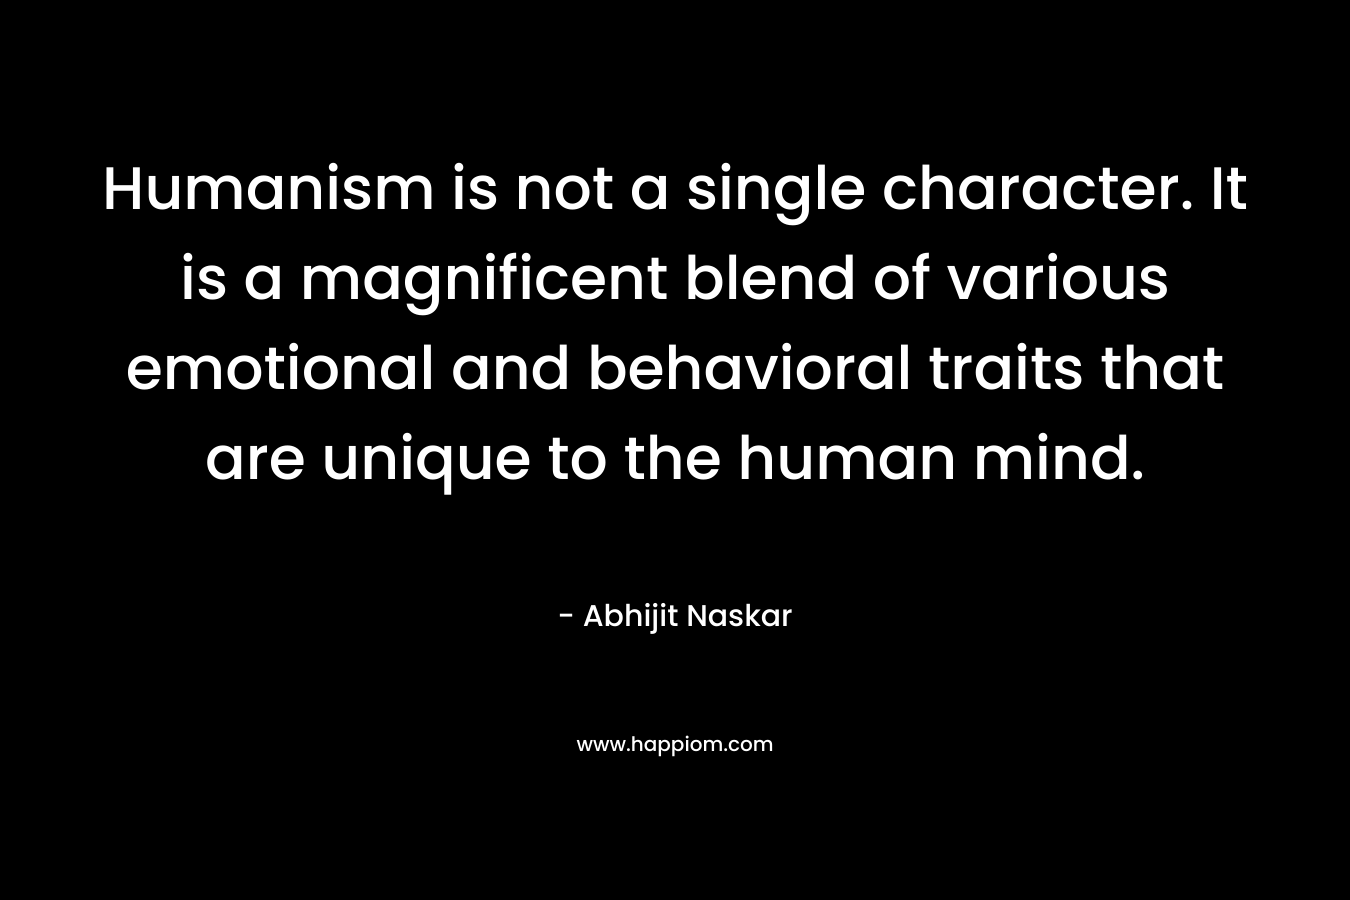 Humanism is not a single character. It is a magnificent blend of various emotional and behavioral traits that are unique to the human mind. – Abhijit Naskar